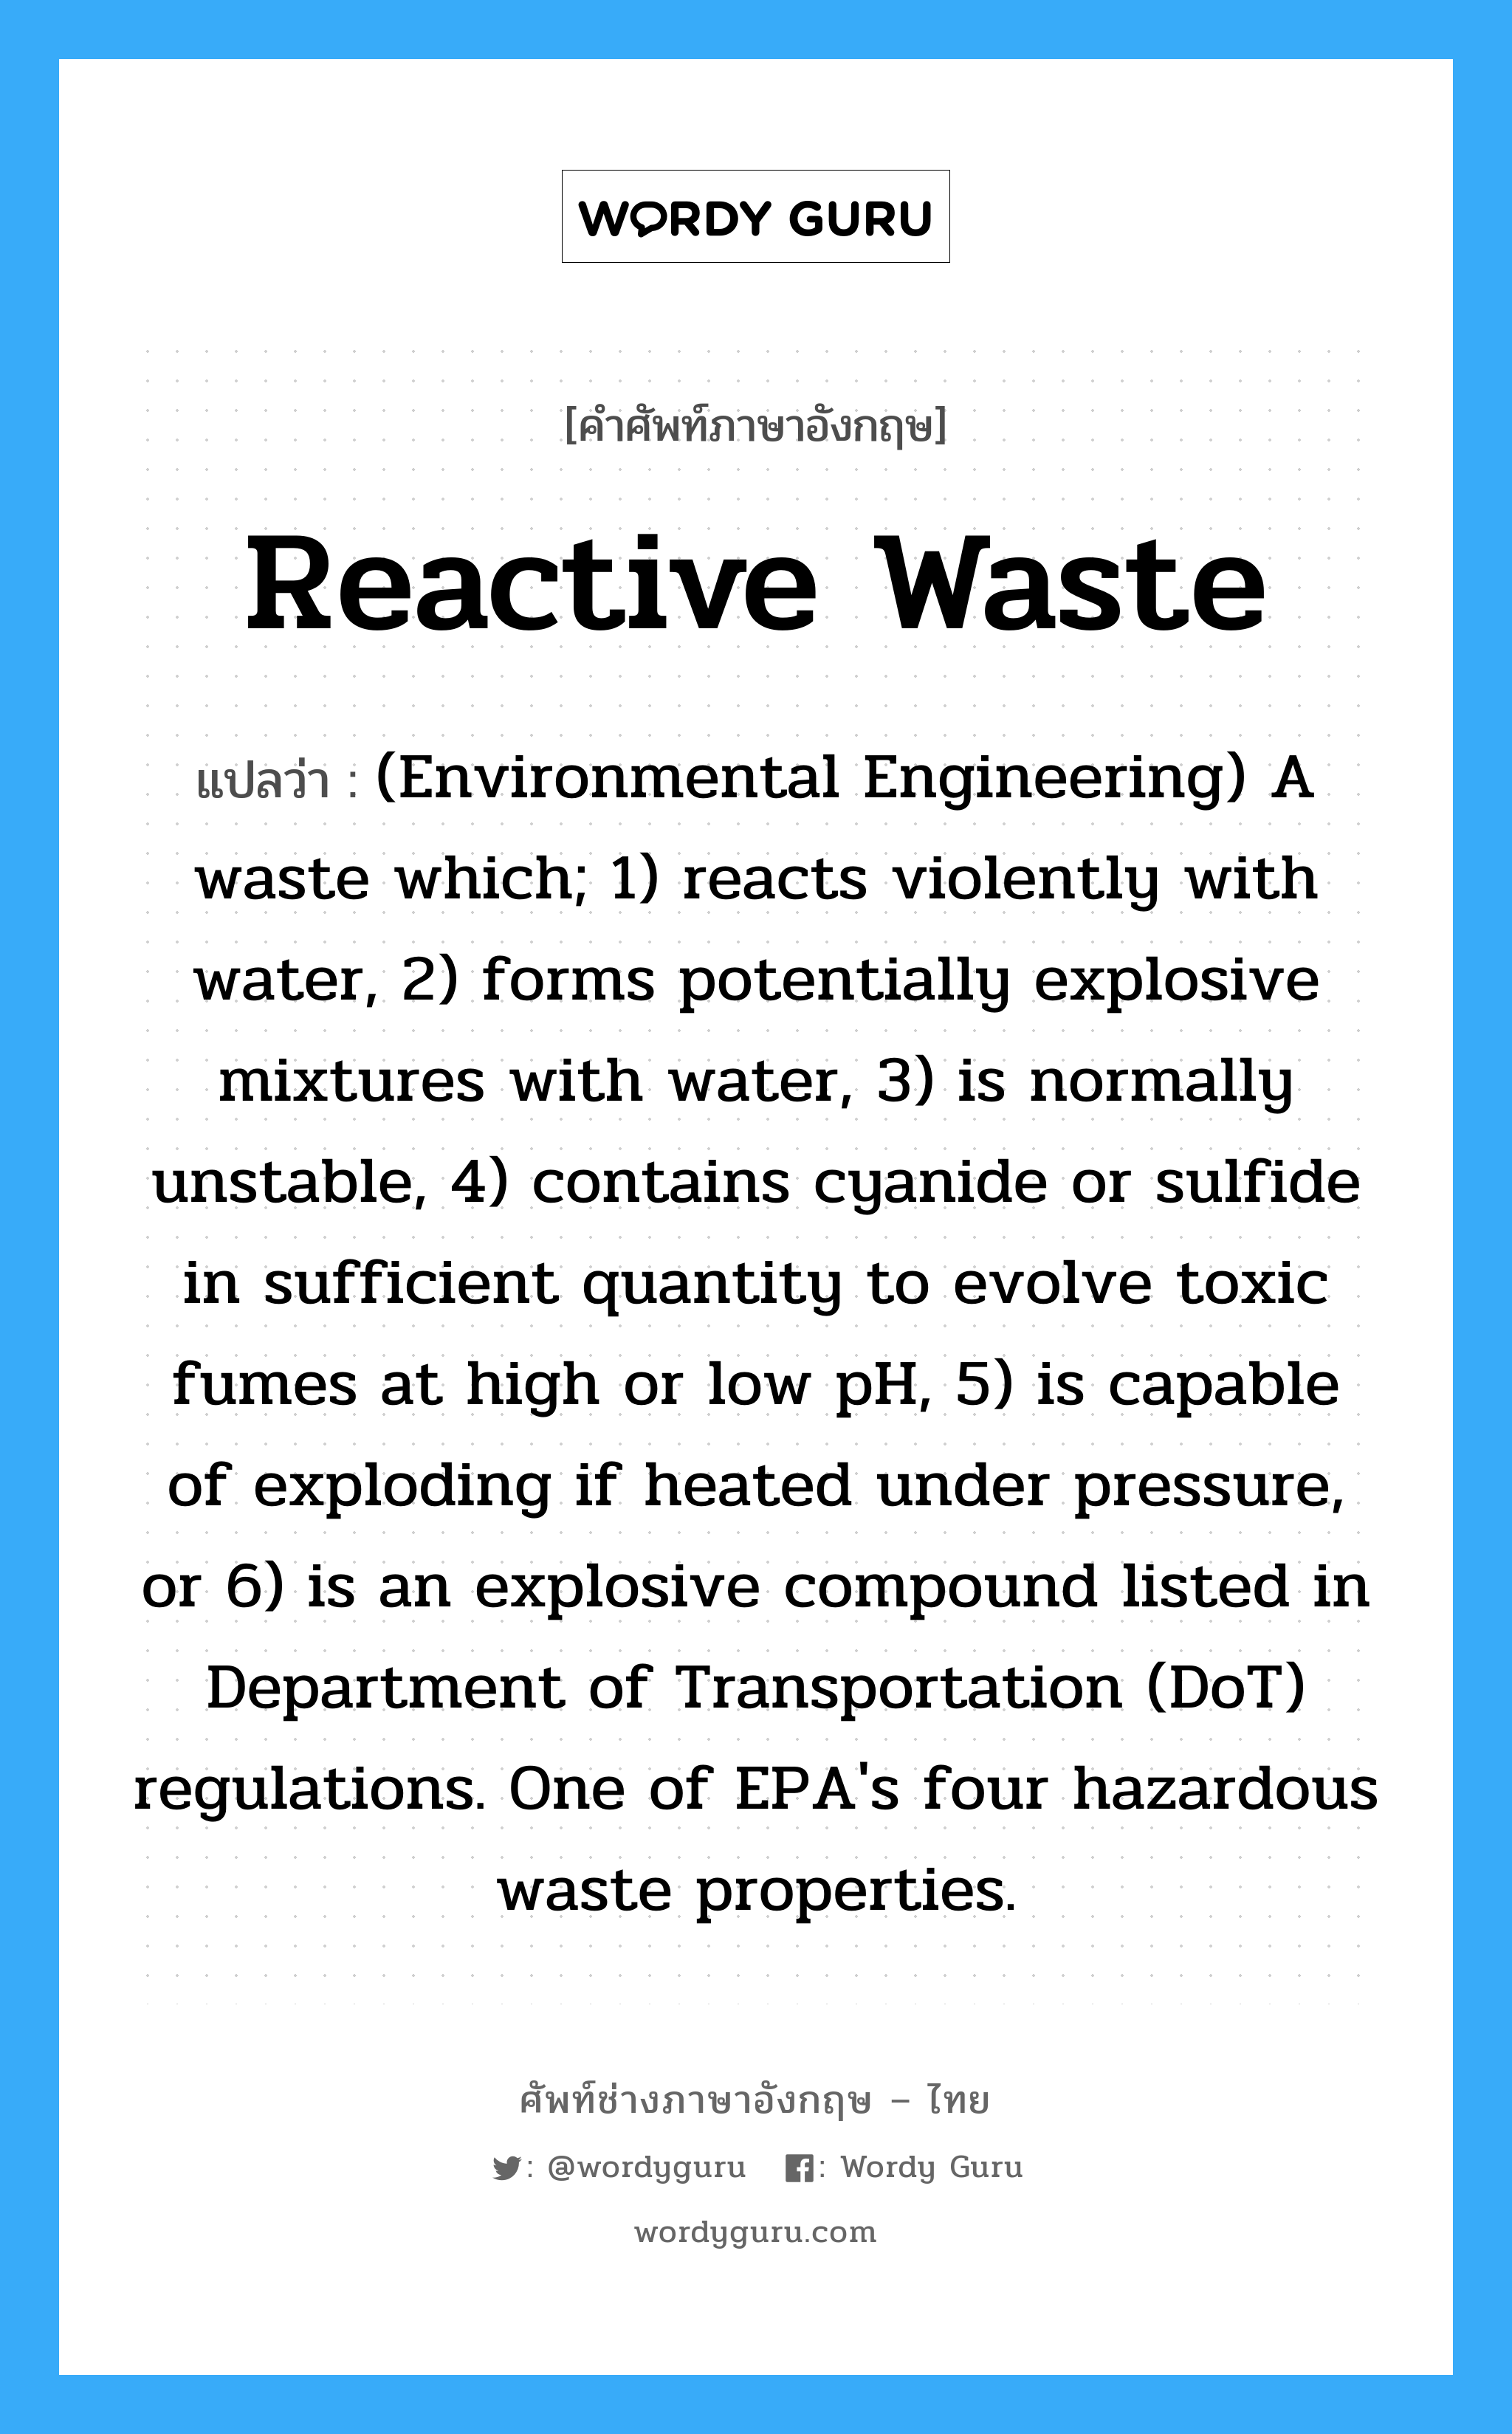 Reactive waste แปลว่า?, คำศัพท์ช่างภาษาอังกฤษ - ไทย Reactive waste คำศัพท์ภาษาอังกฤษ Reactive waste แปลว่า (Environmental Engineering) A waste which; 1) reacts violently with water, 2) forms potentially explosive mixtures with water, 3) is normally unstable, 4) contains cyanide or sulfide in sufficient quantity to evolve toxic fumes at high or low pH, 5) is capable of exploding if heated under pressure, or 6) is an explosive compound listed in Department of Transportation (DoT) regulations. One of EPA's four hazardous waste properties.